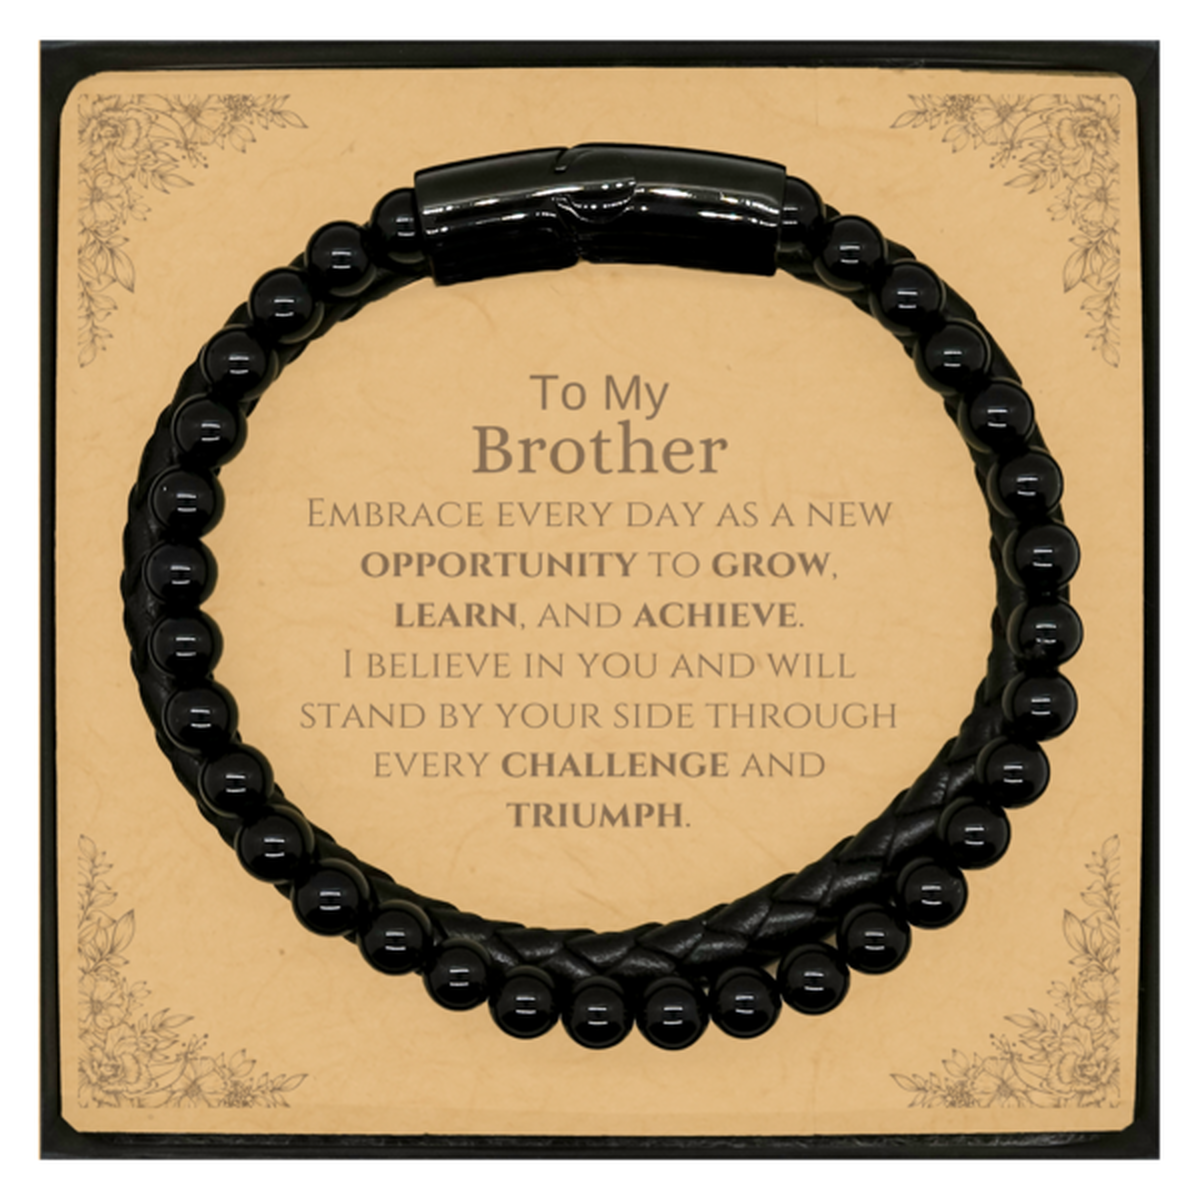 To My Brother Gifts, I believe in you and will stand by your side, Inspirational Stone Leather Bracelets For Brother, Birthday Christmas Motivational Brother Gifts